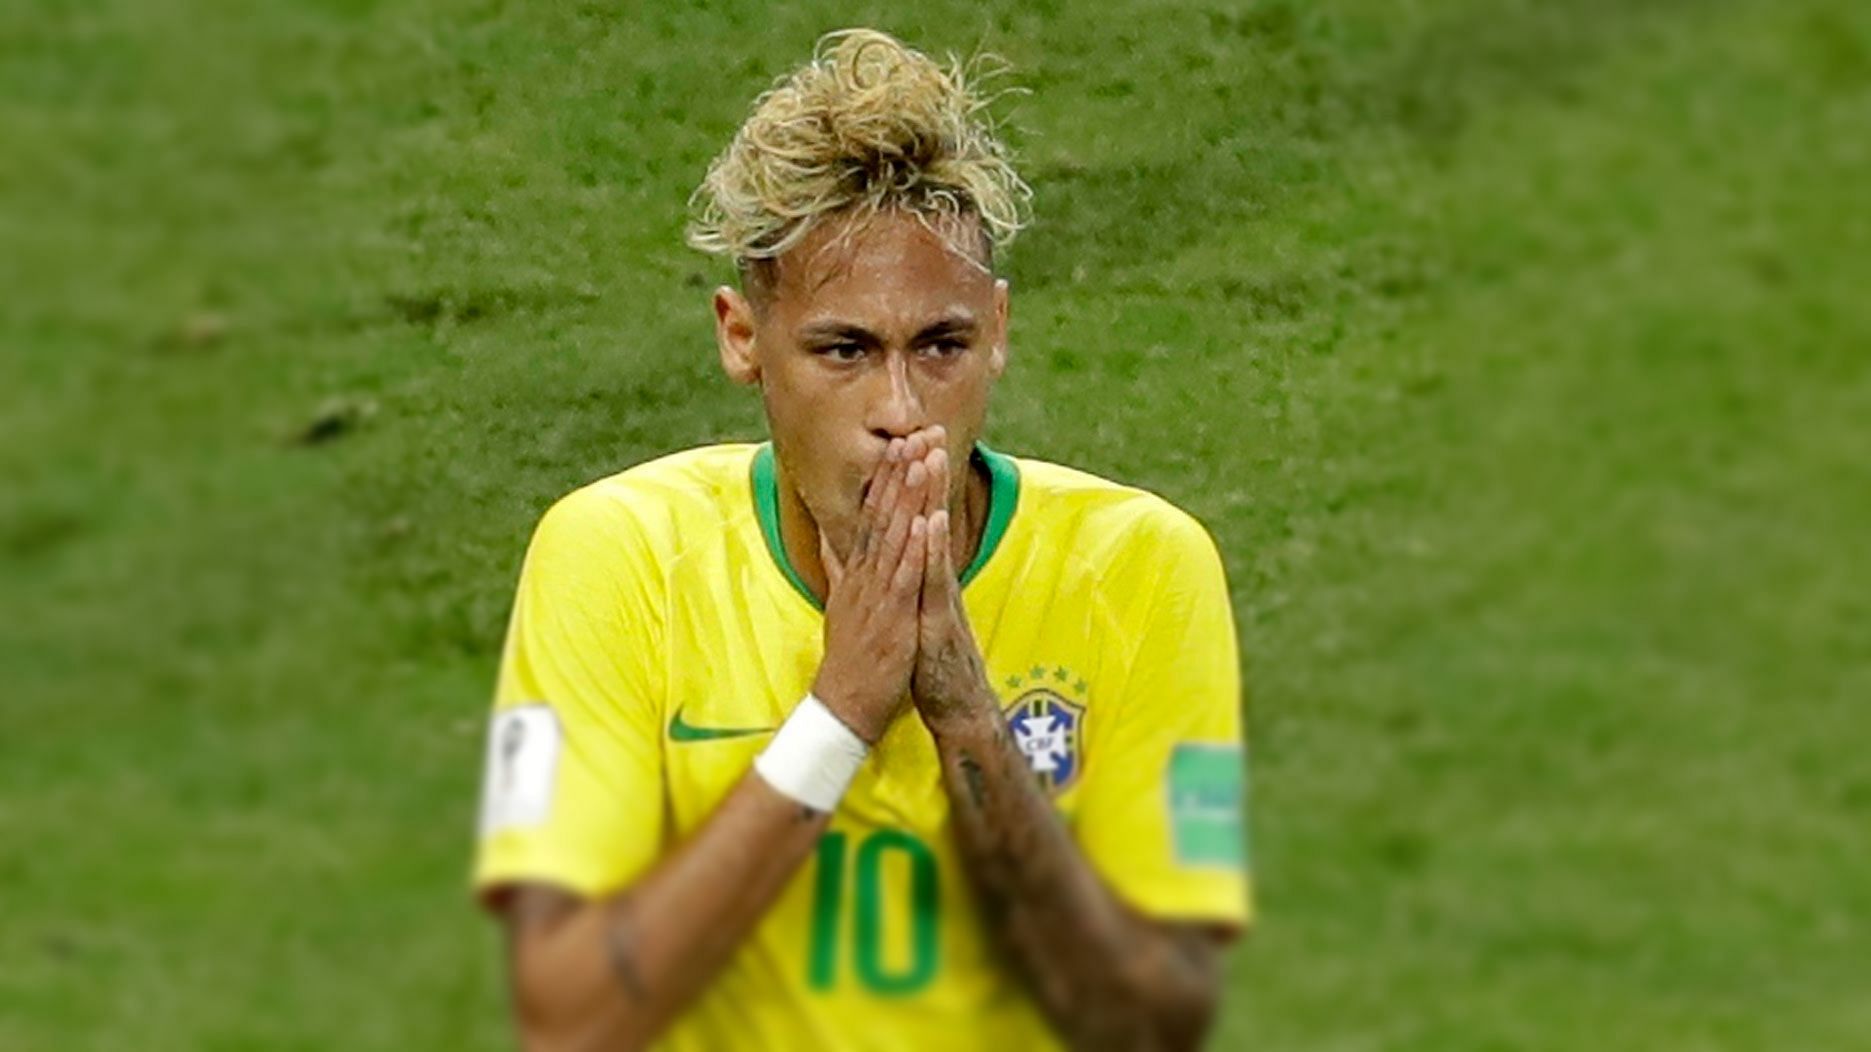 PSG striker, Neymar was included in the Copa America squad despite his  league suspension for an altercation with a fan.